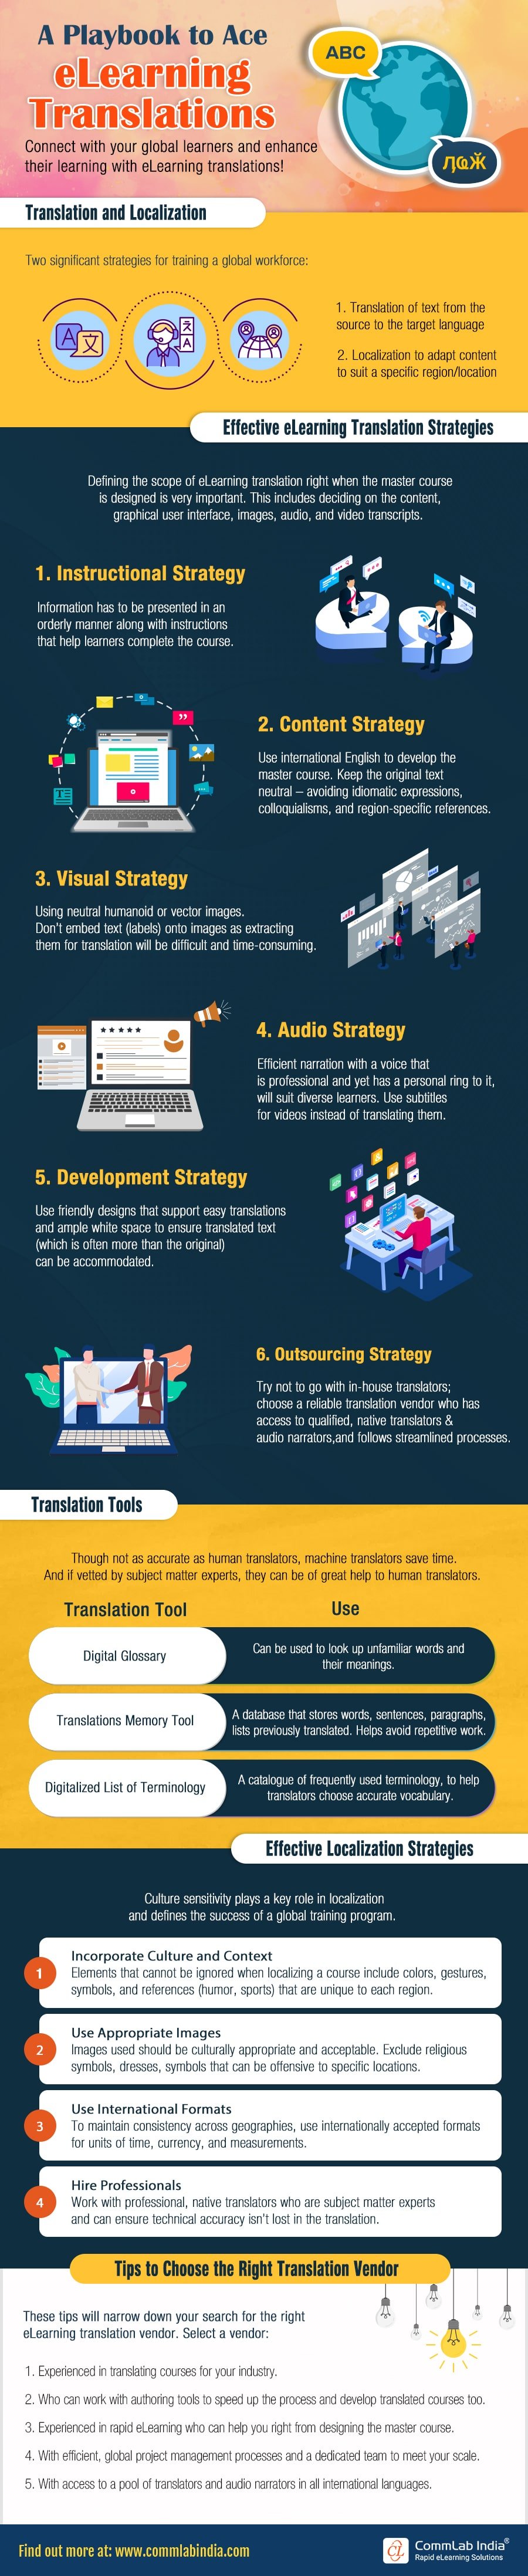 eLearning Translation Strategies for Effective Training, Happy Employees